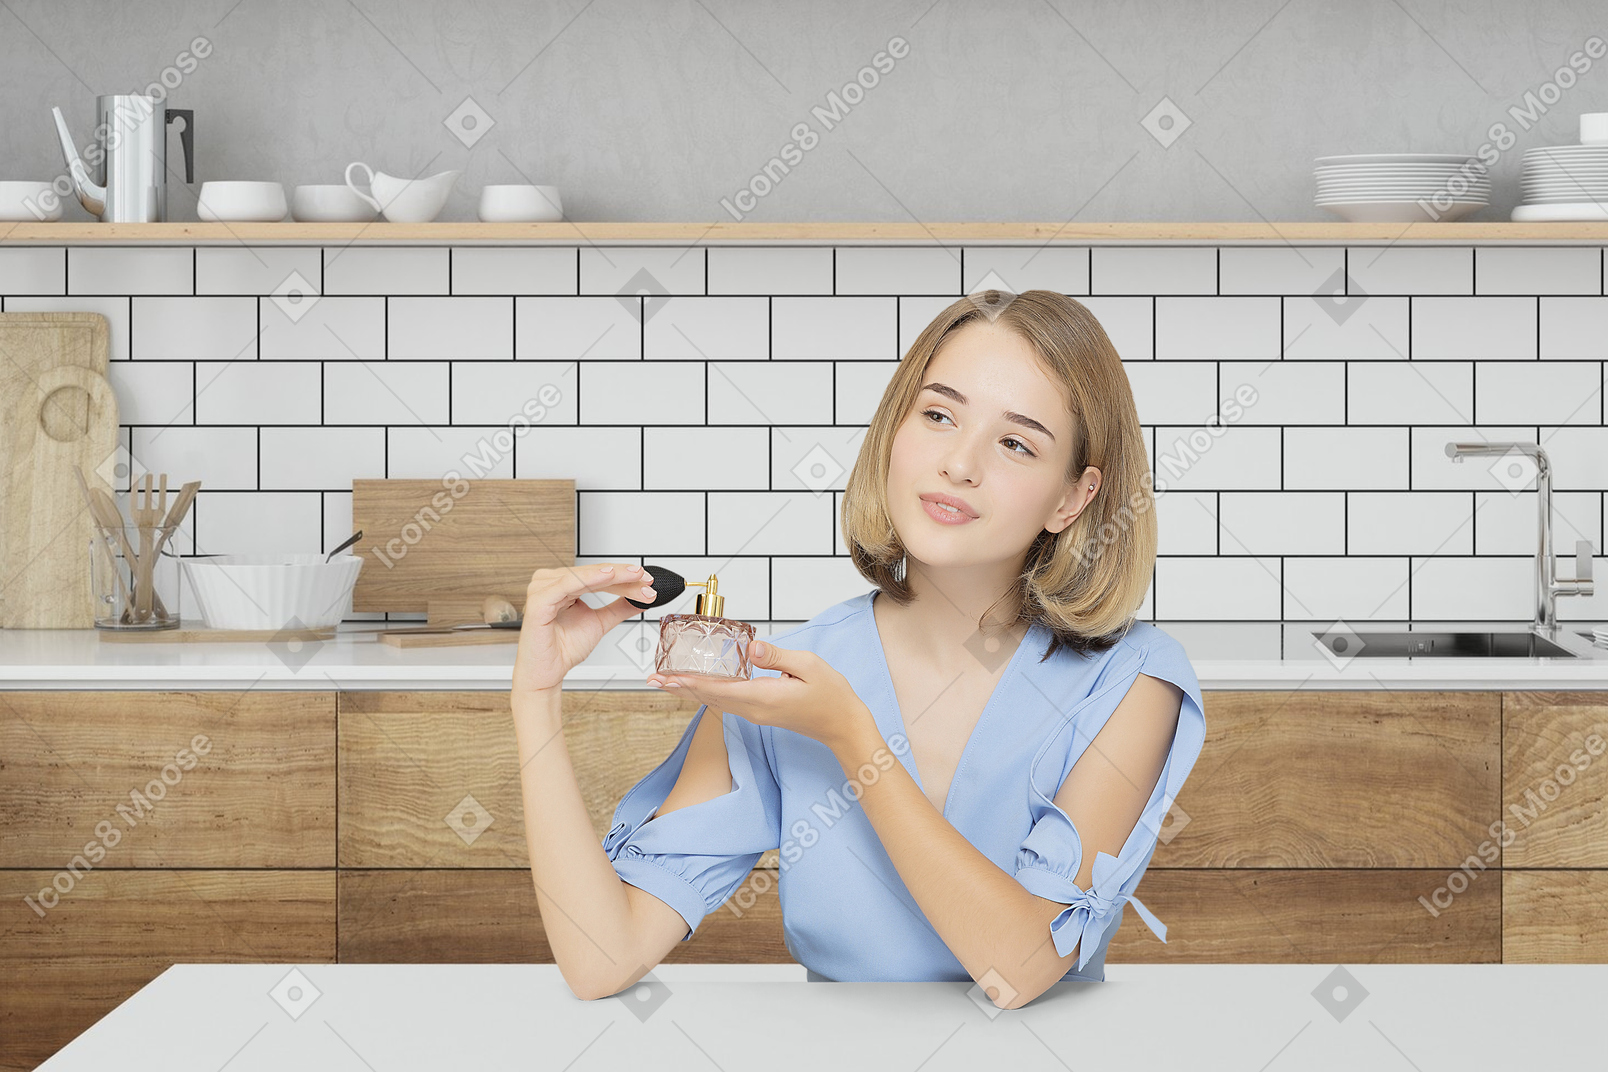 Young woman sitting in the kitchen and holding a perfume bottle